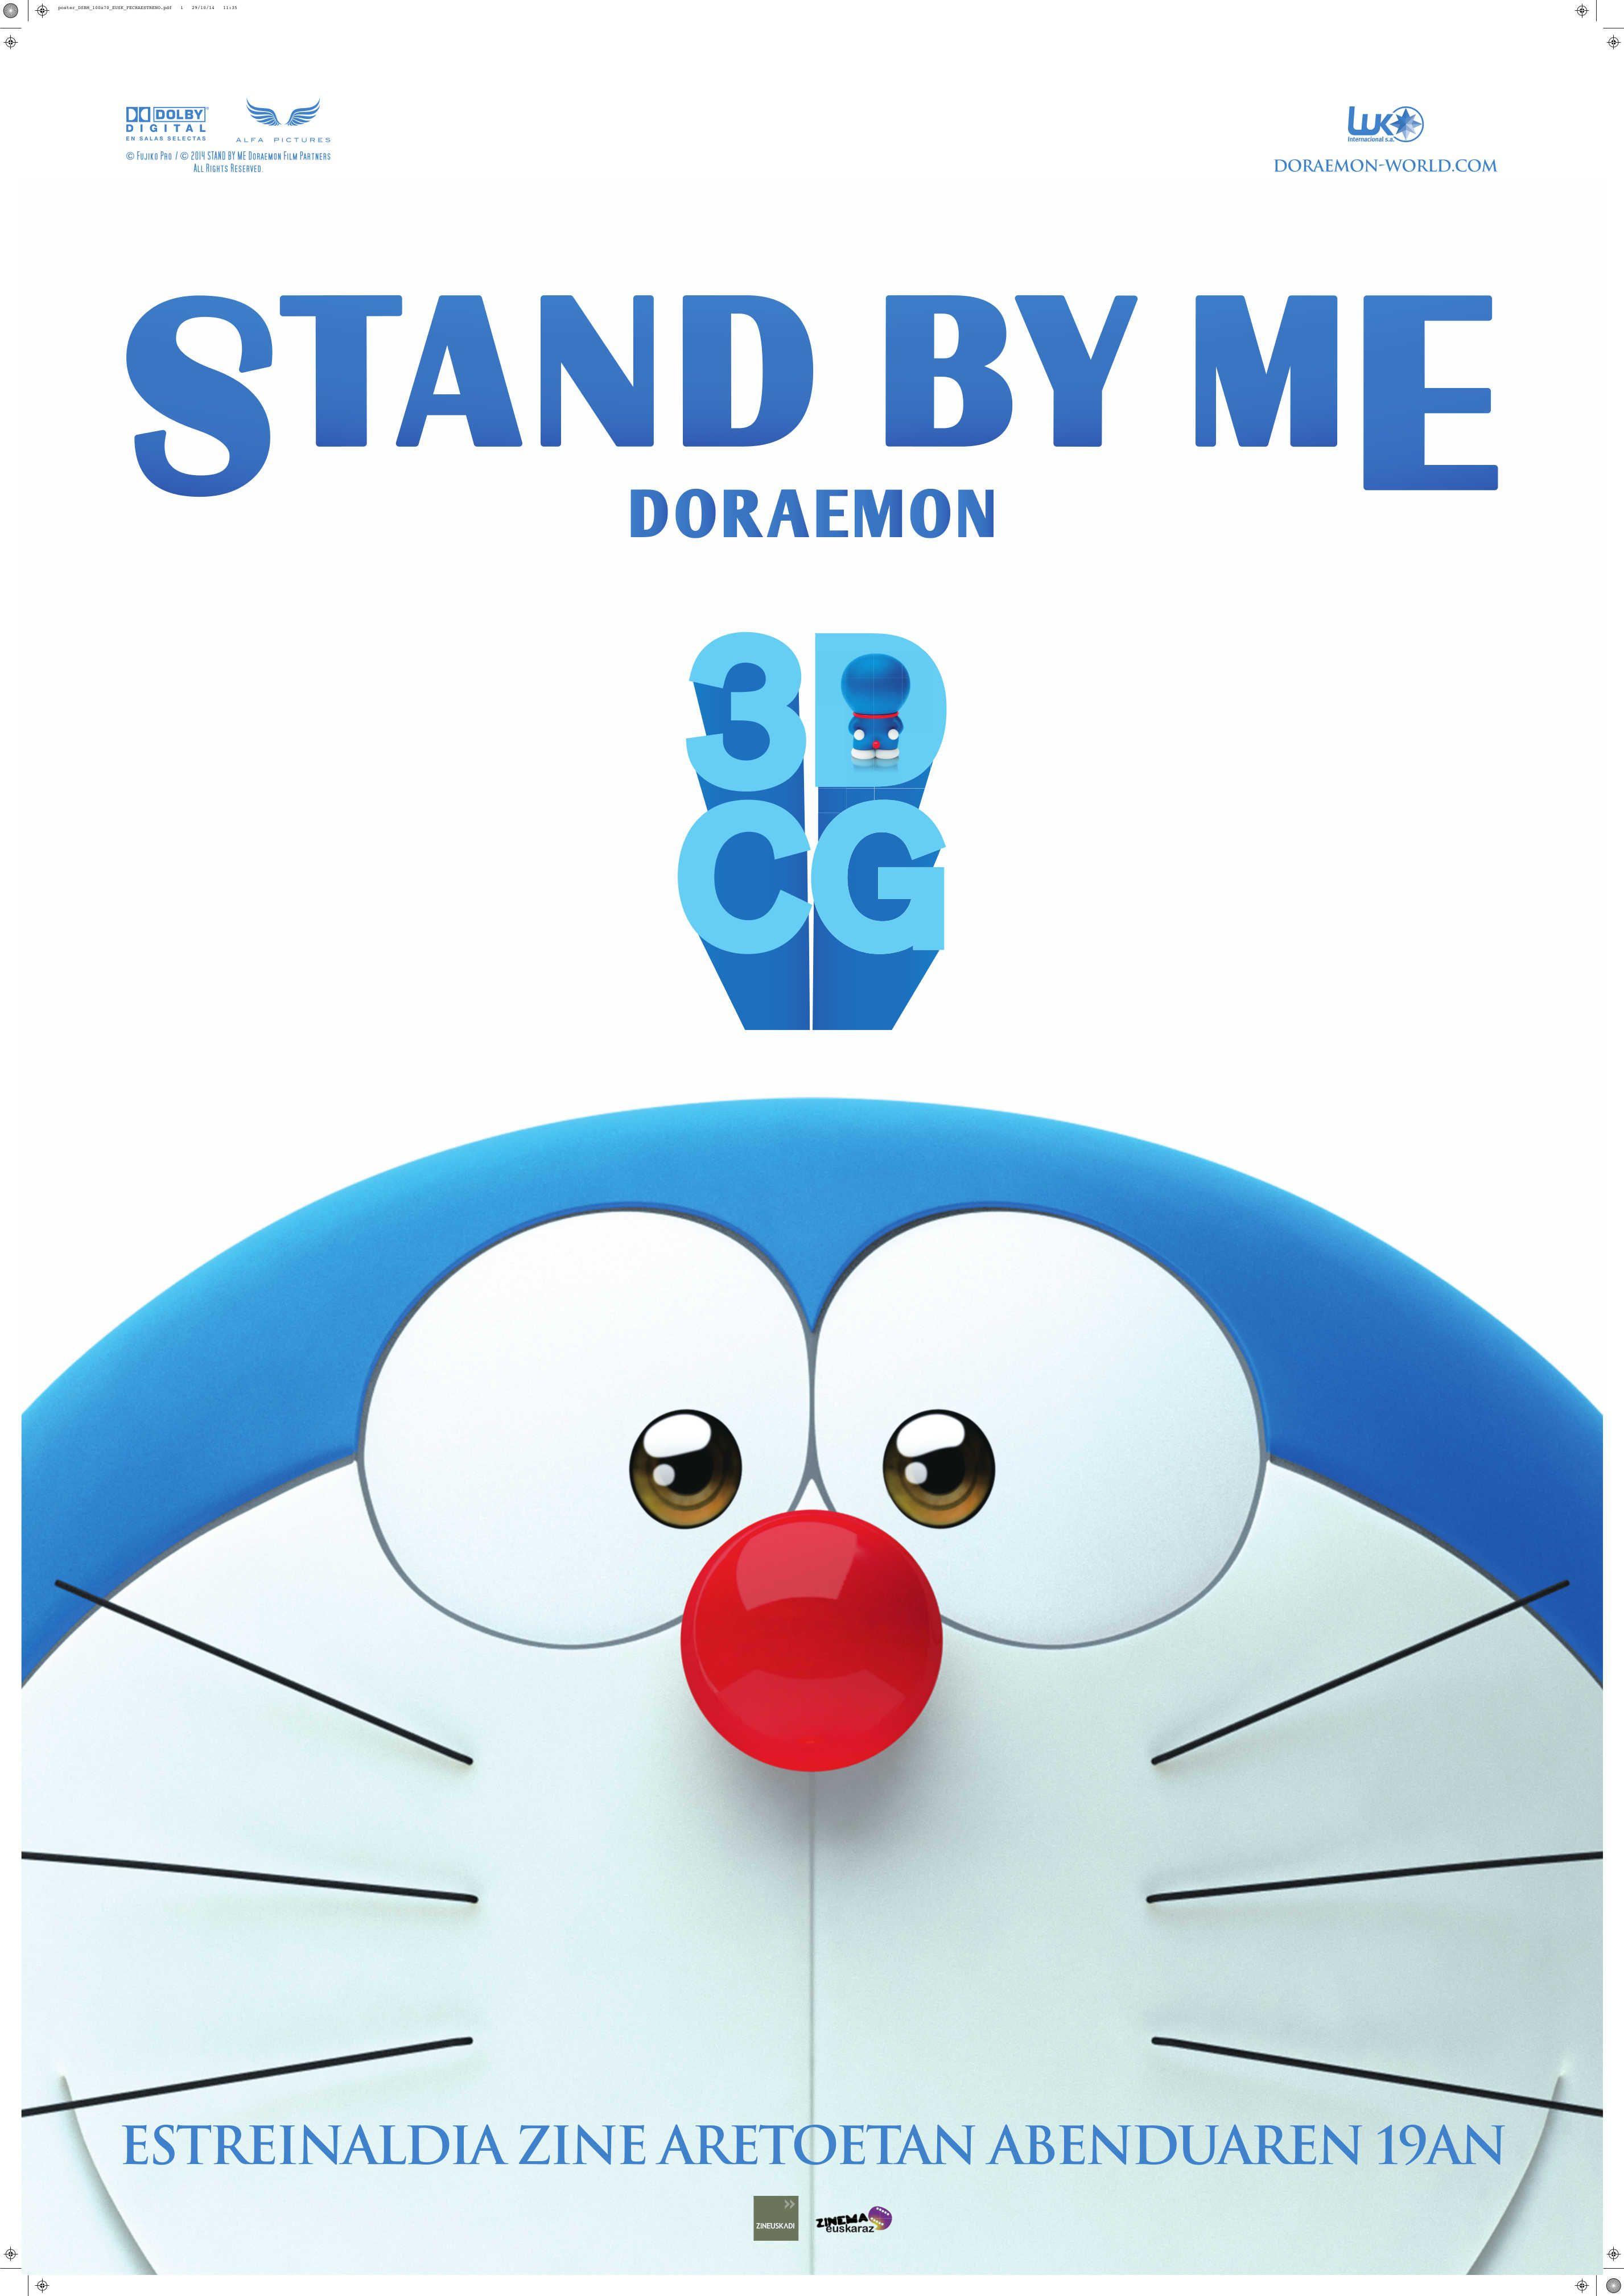 Stand By Me Doraemon Mobile Wallpaper. My